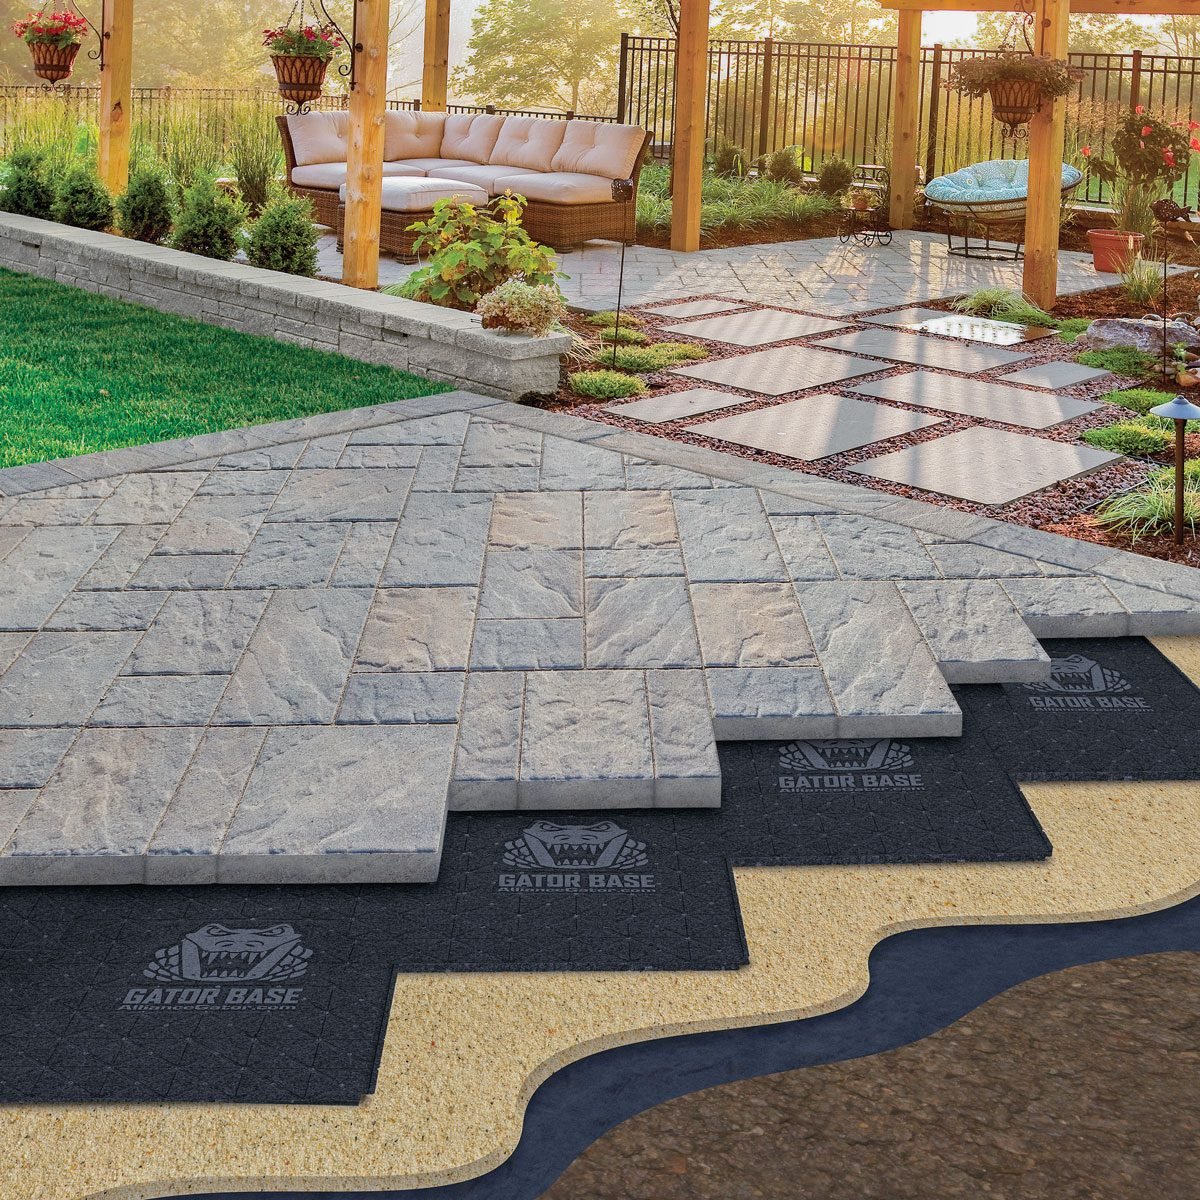 How to Install a Paver Patio Base